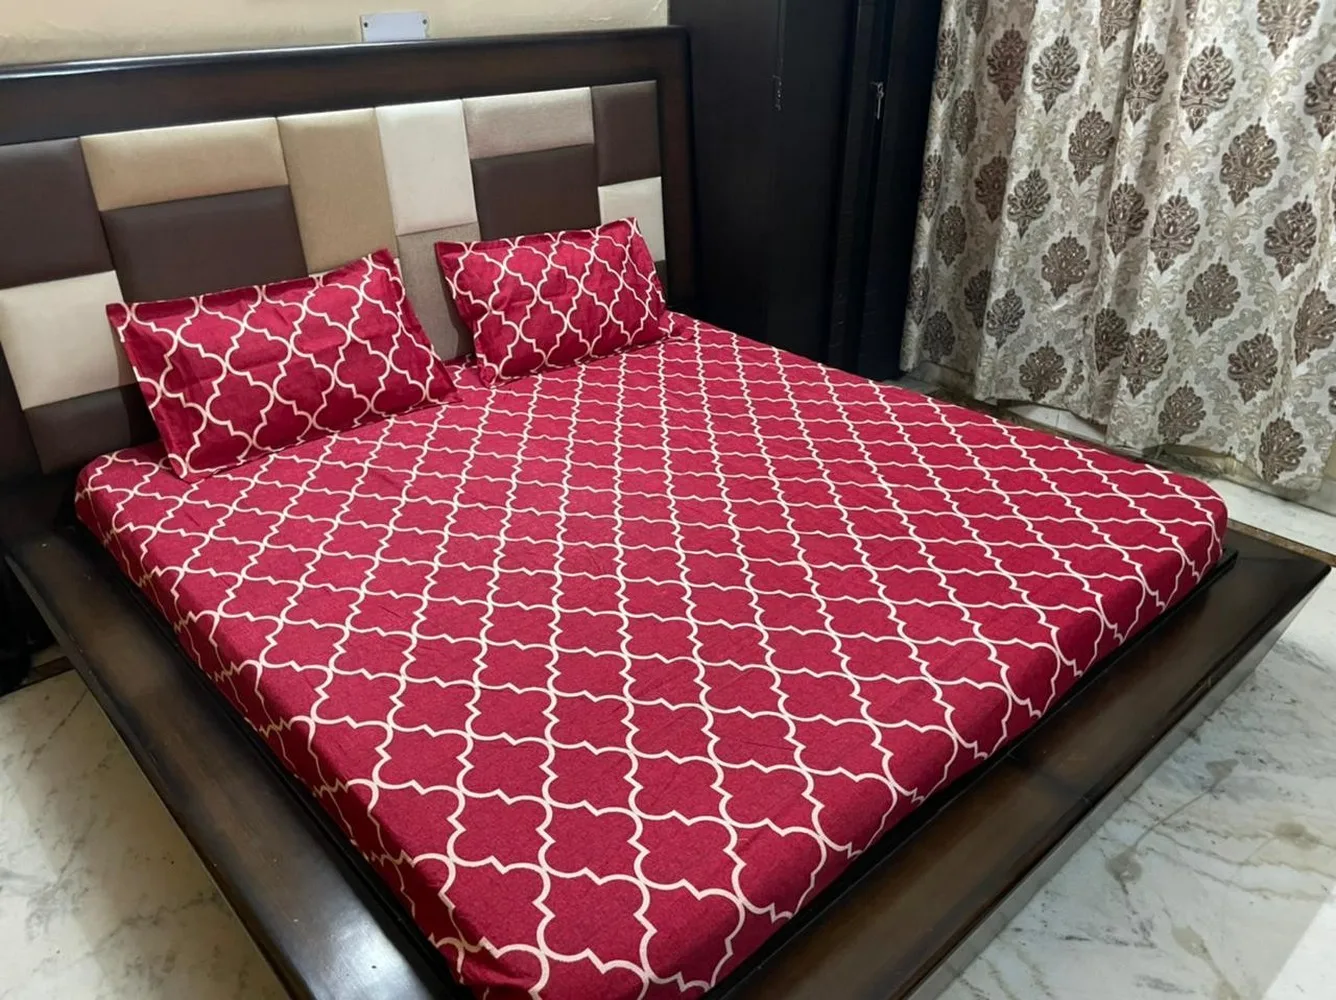 Bedsheet printed, Fitted, Elastic Corner, 90x100, Glace Cotton, 2 Pillow Covers, red, club design